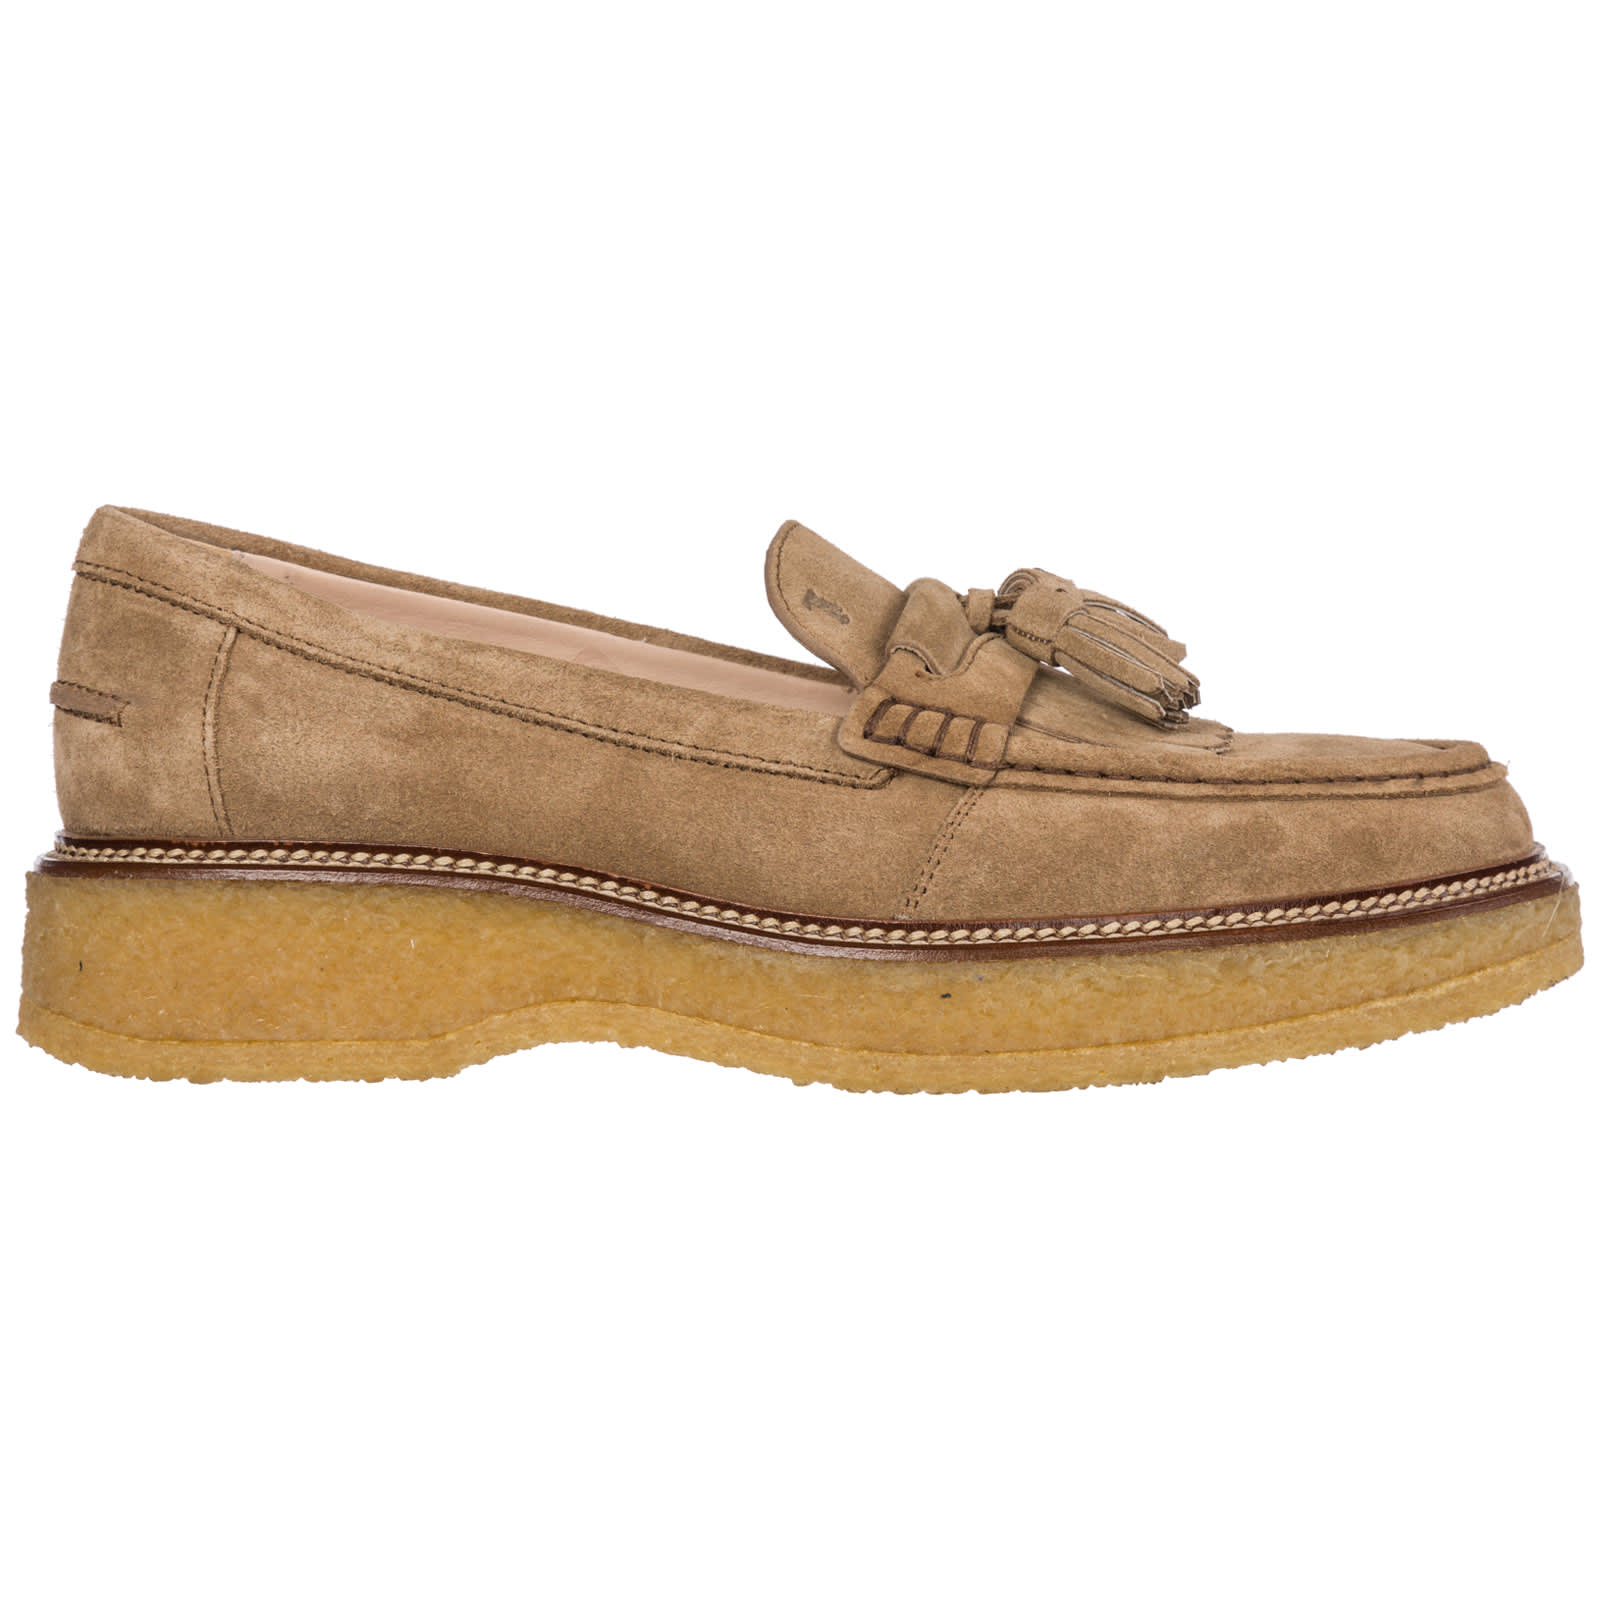 Buy Tods Voix Humaine 8 Moccasins online, shop Tods shoes with free shipping